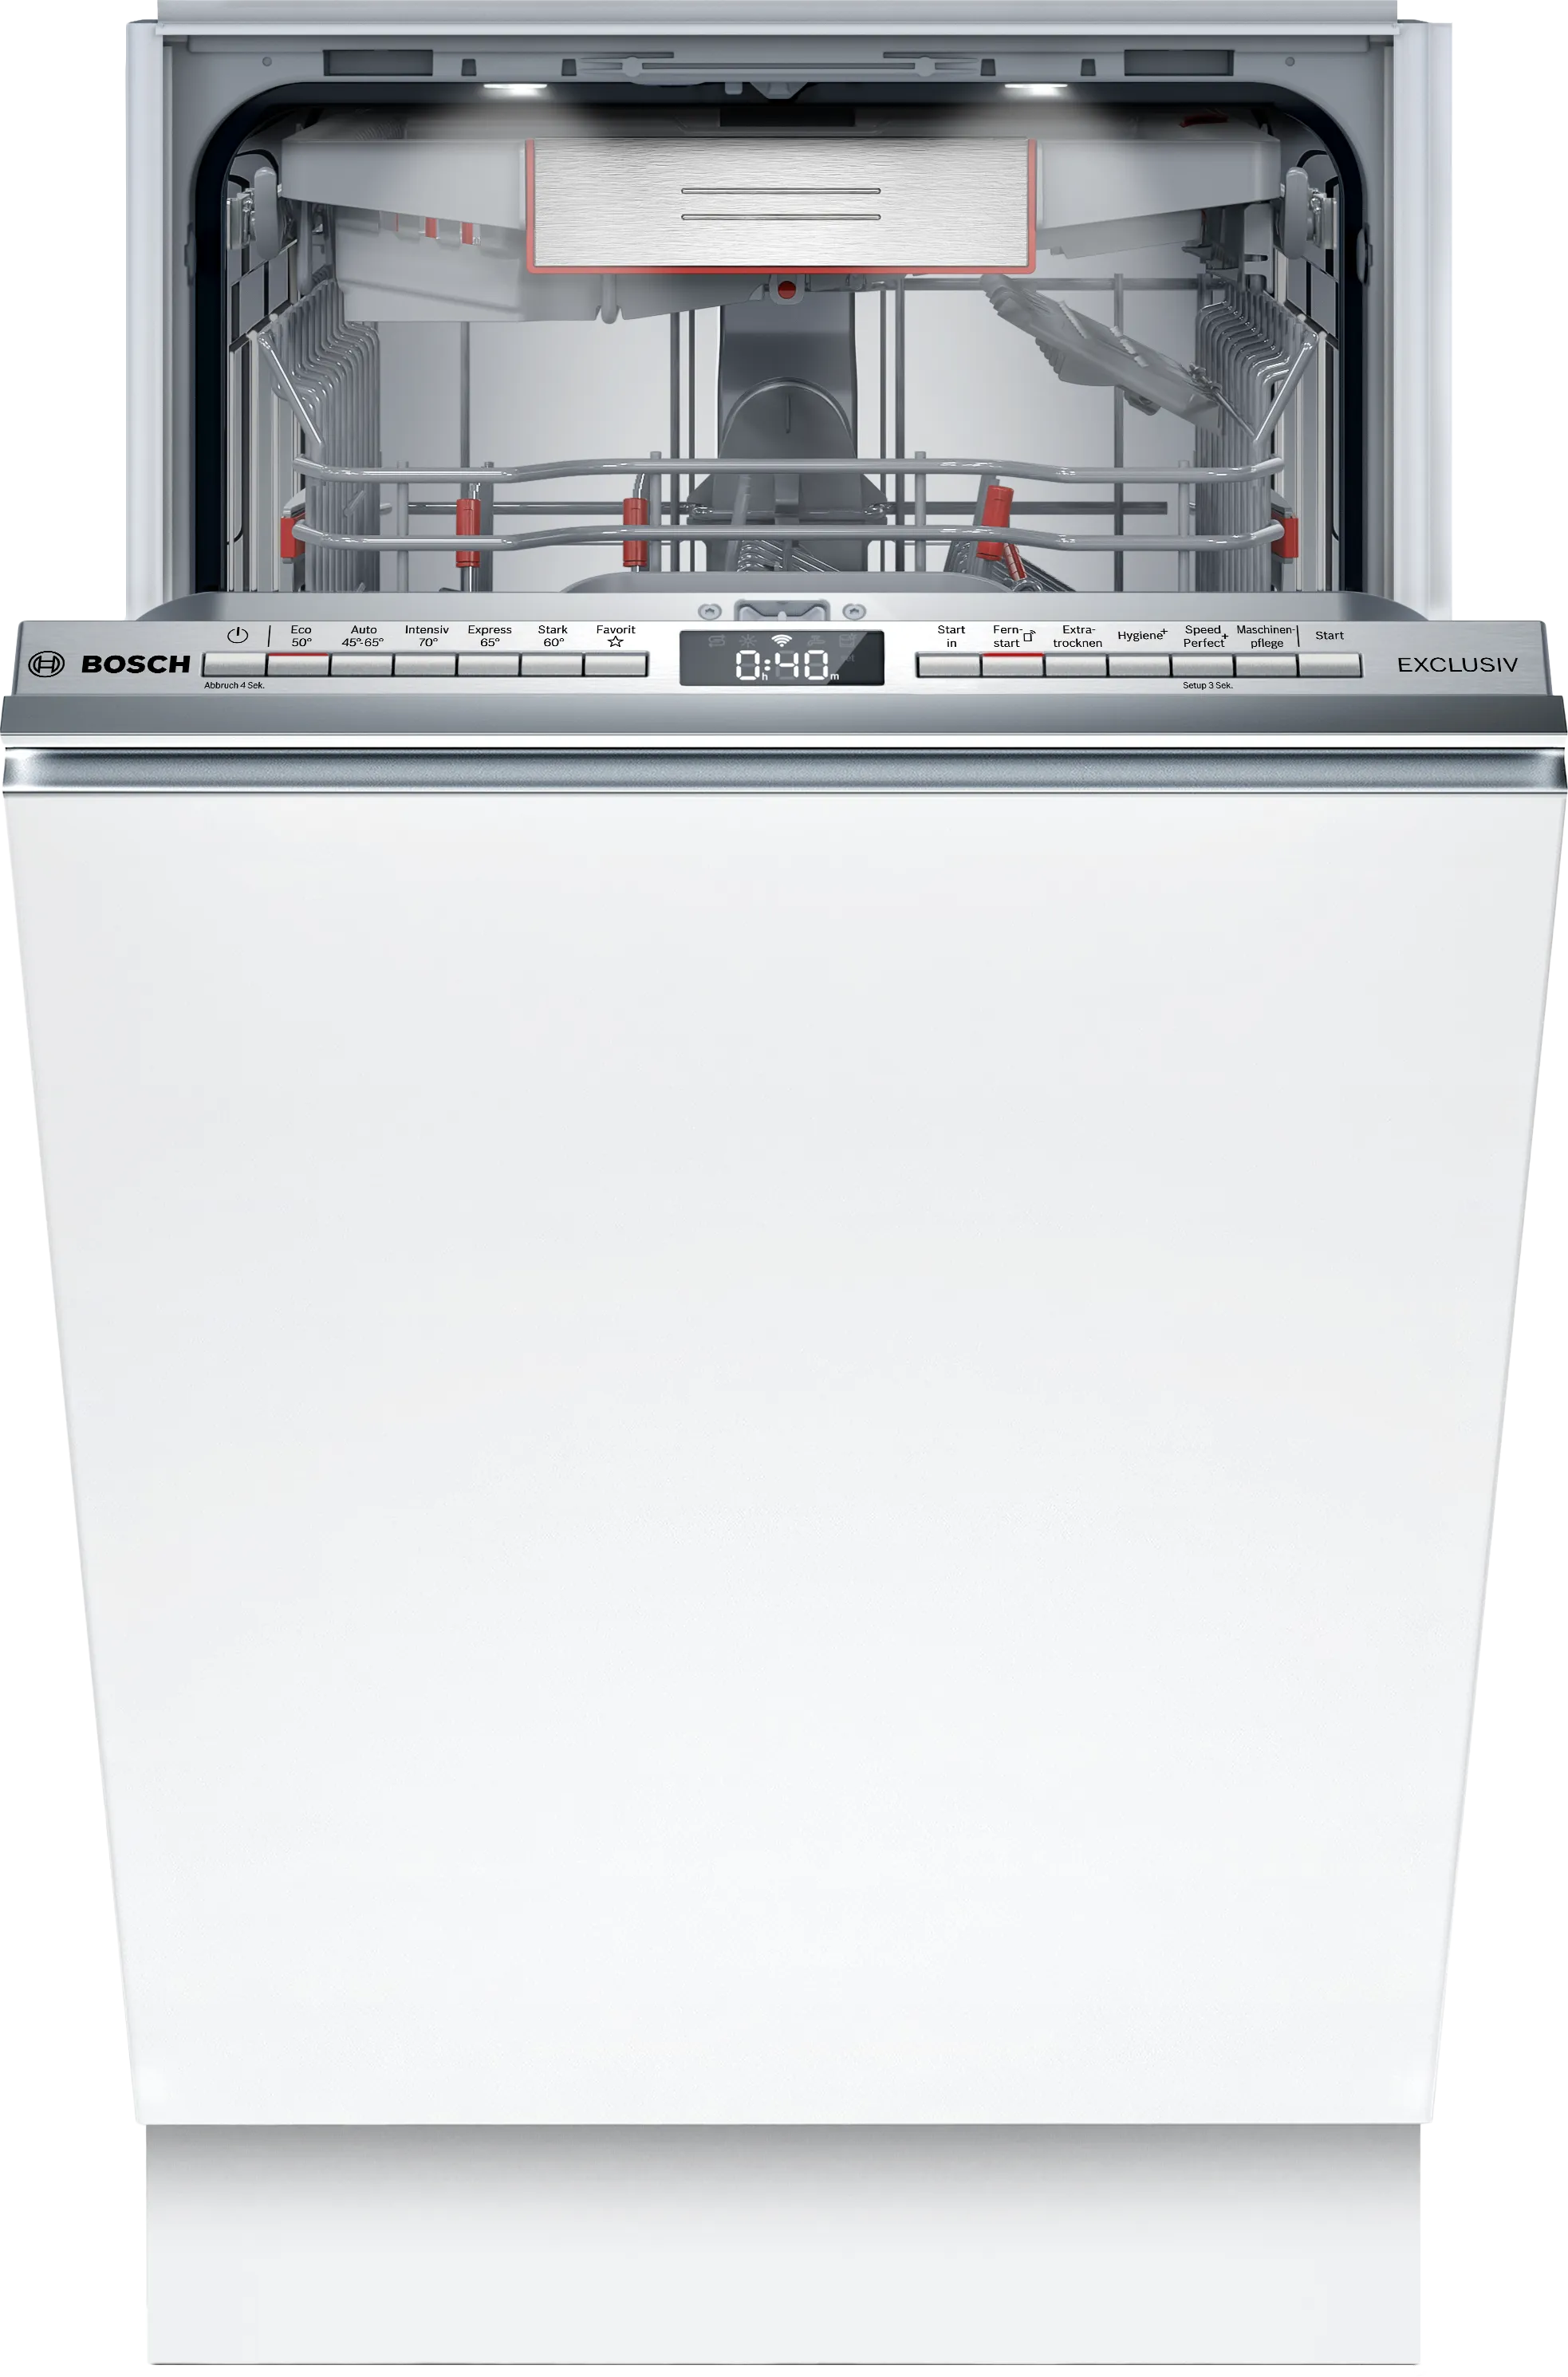 Series 6 fully-integrated dishwasher 45 cm 